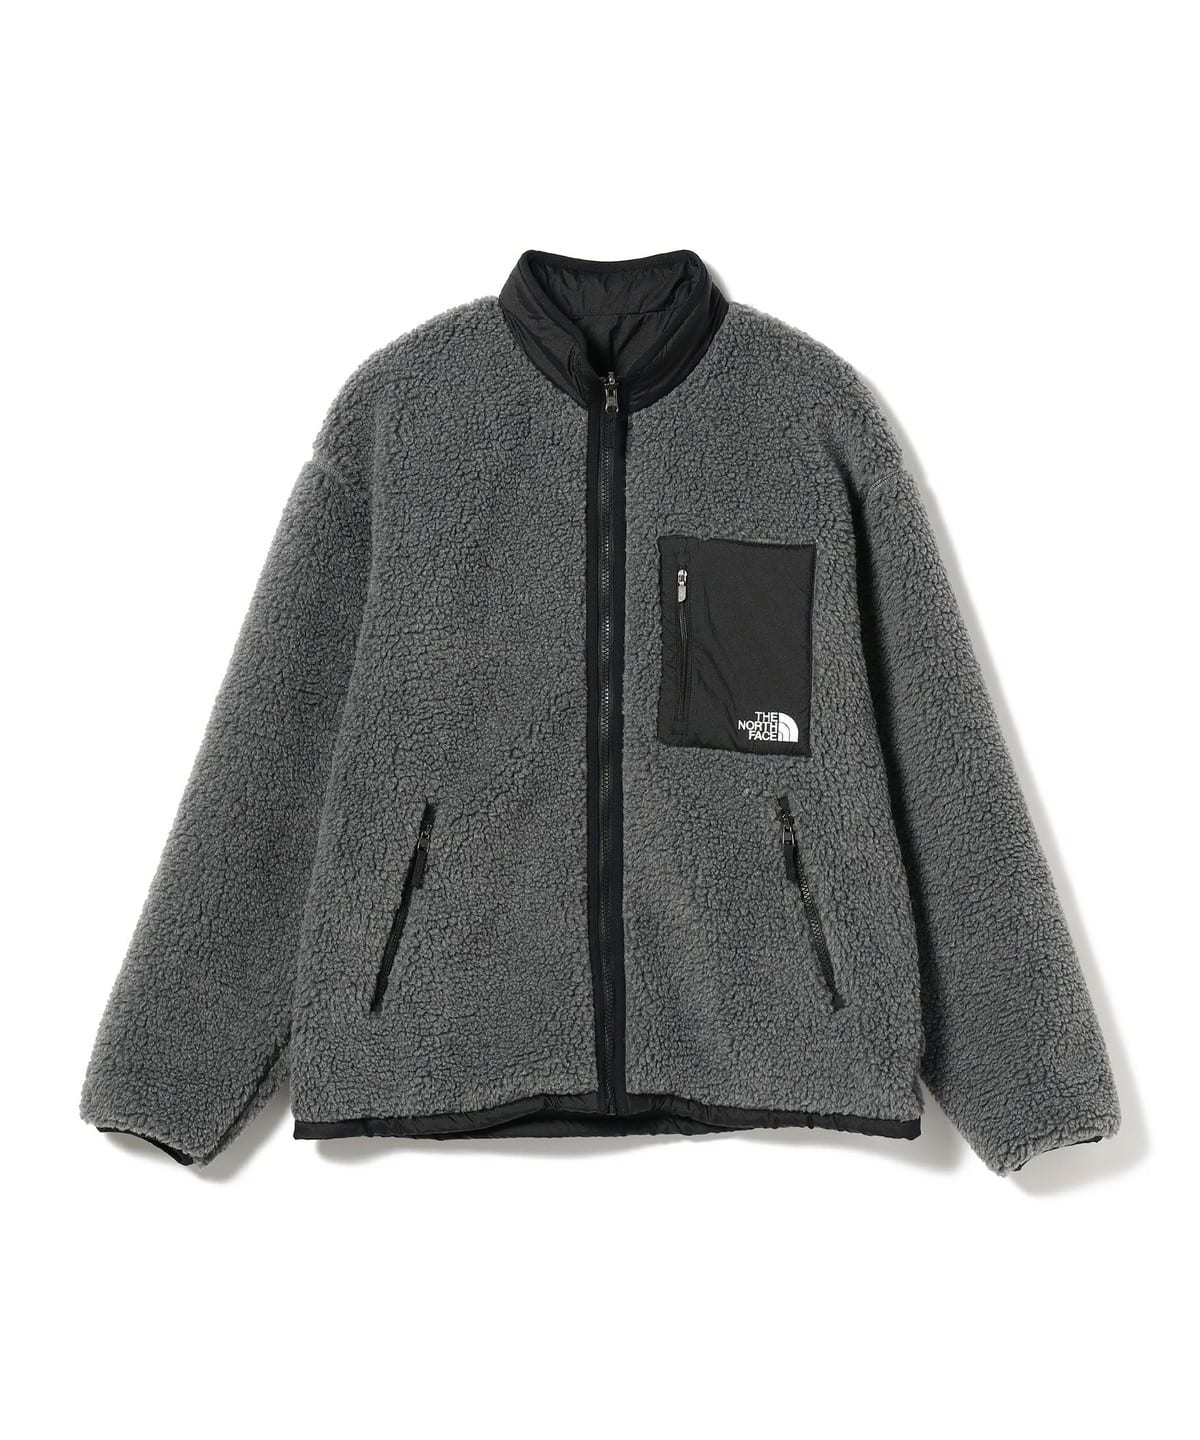 BEAMS（ビームス）THE NORTH FACE / Reversible Extreme Pile Jacket 